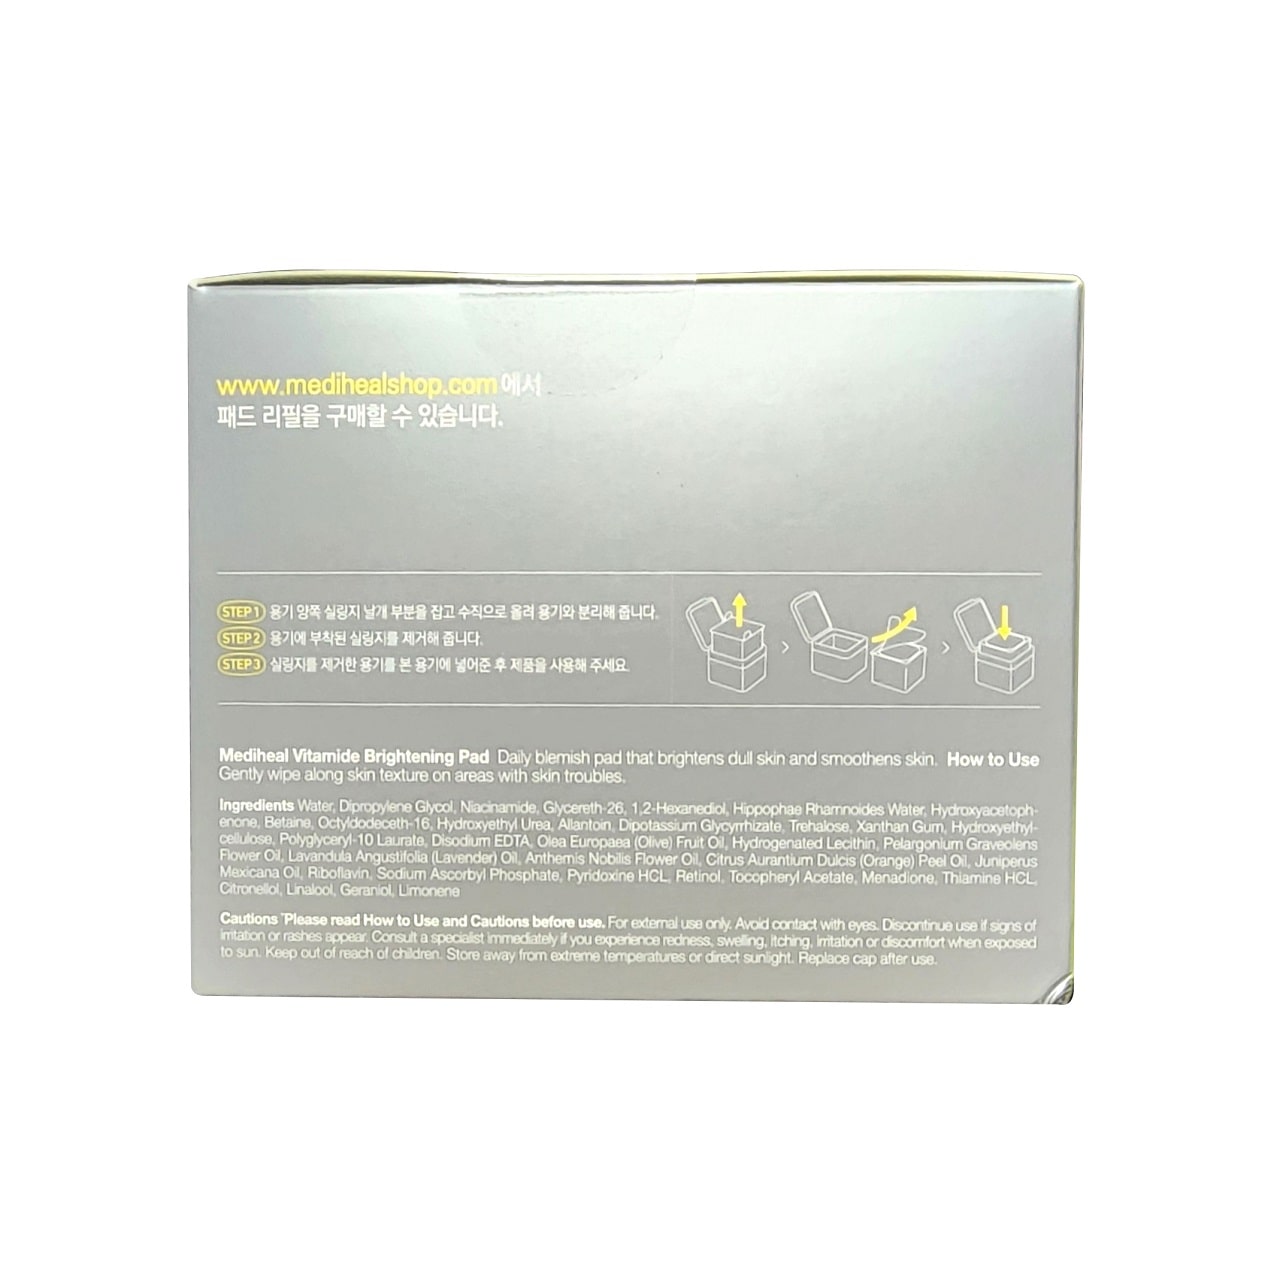 Description, Ingredients, cautions for Mediheal Vitamide Brightening Pads (100 count) in English